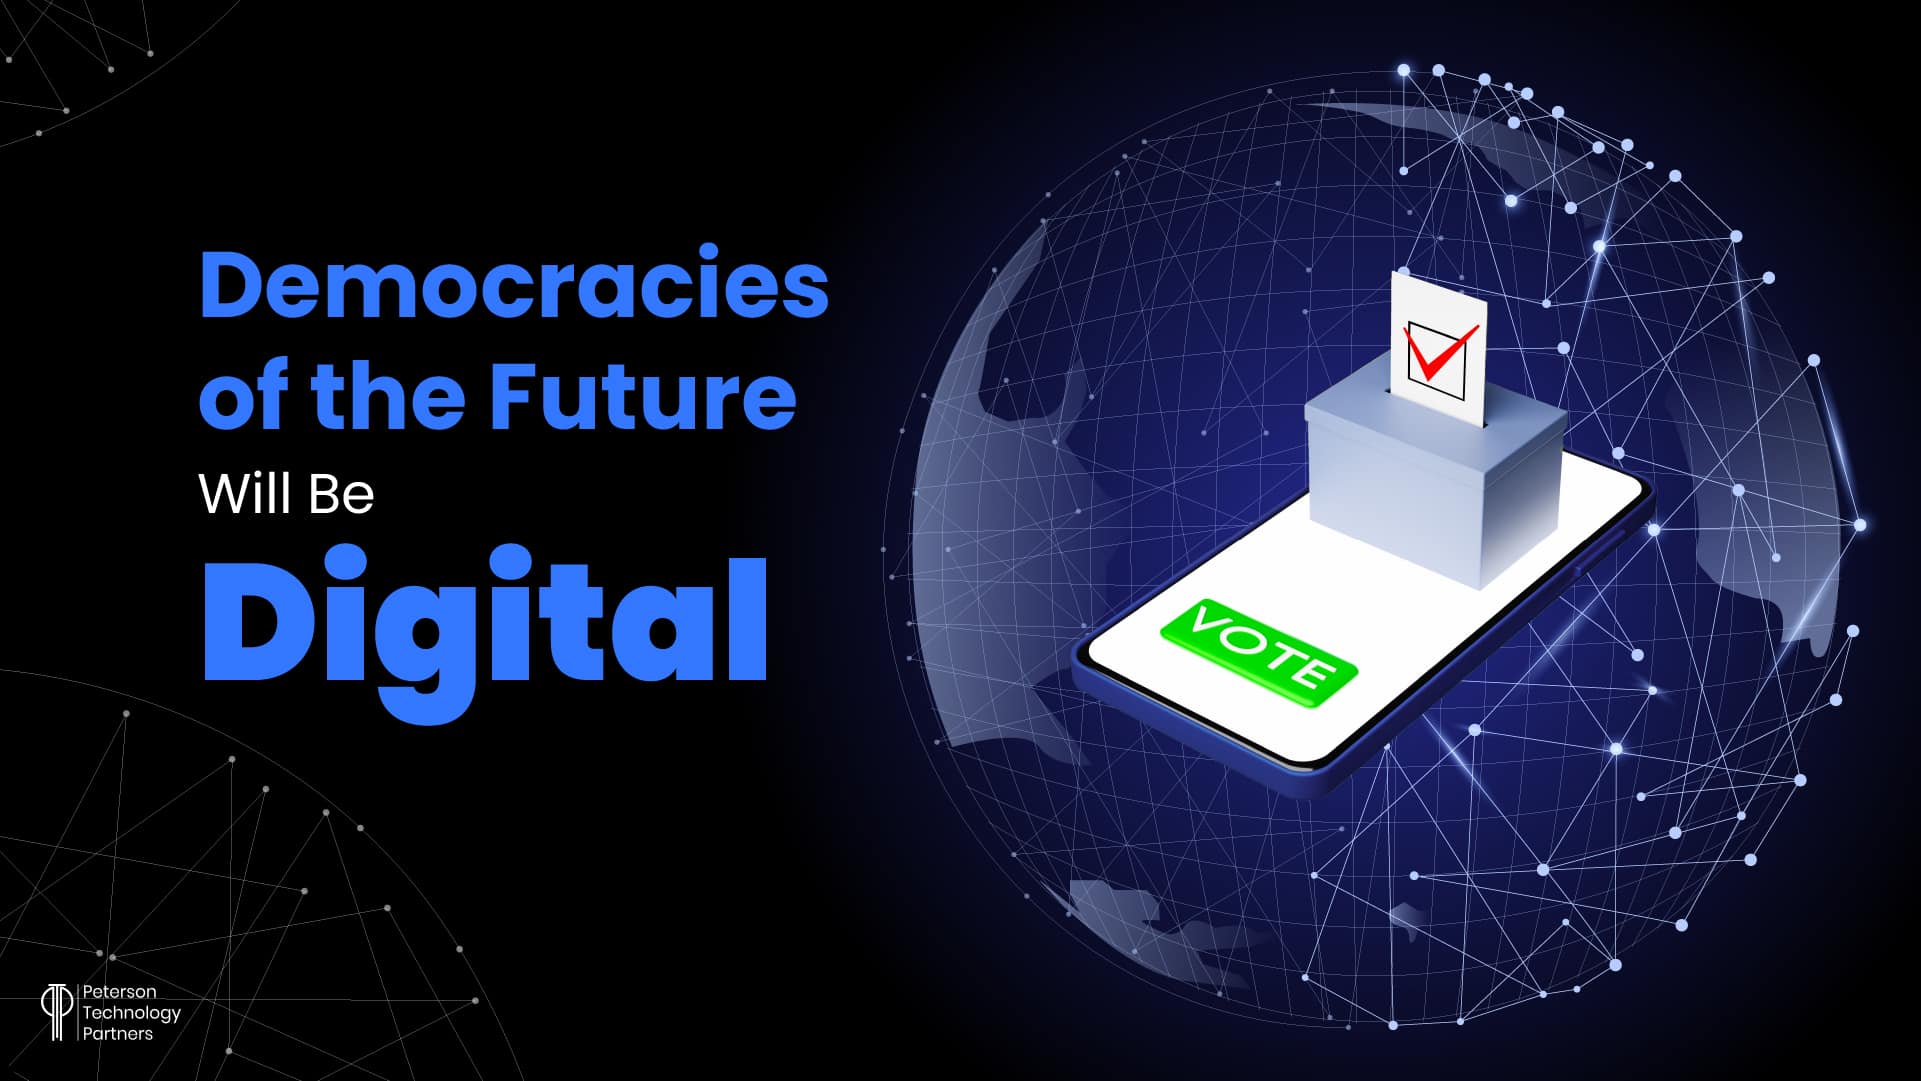 Illustration of interconnected devices and data streams, symbolizing the digital future of democracies